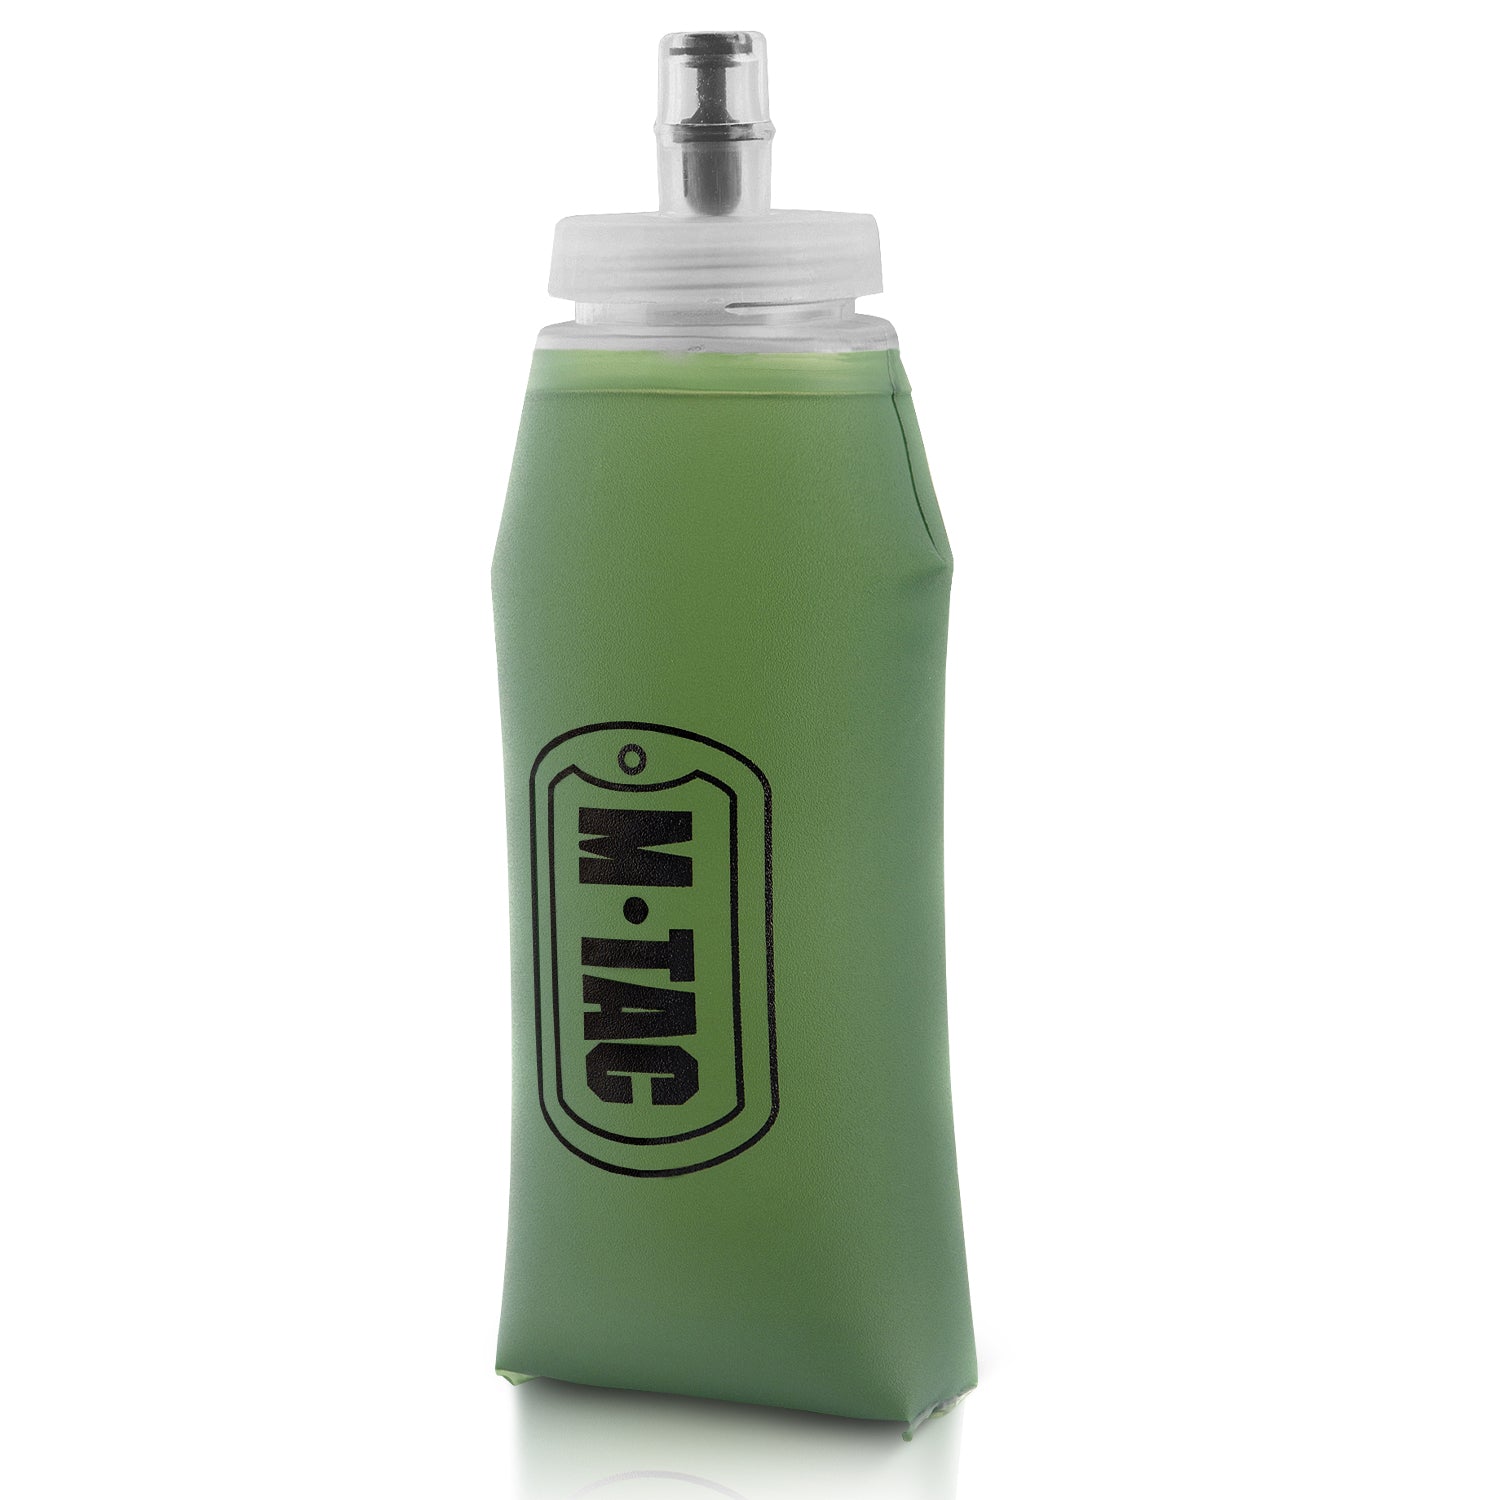 M-Tac Collapsible Water Bottle 20oz